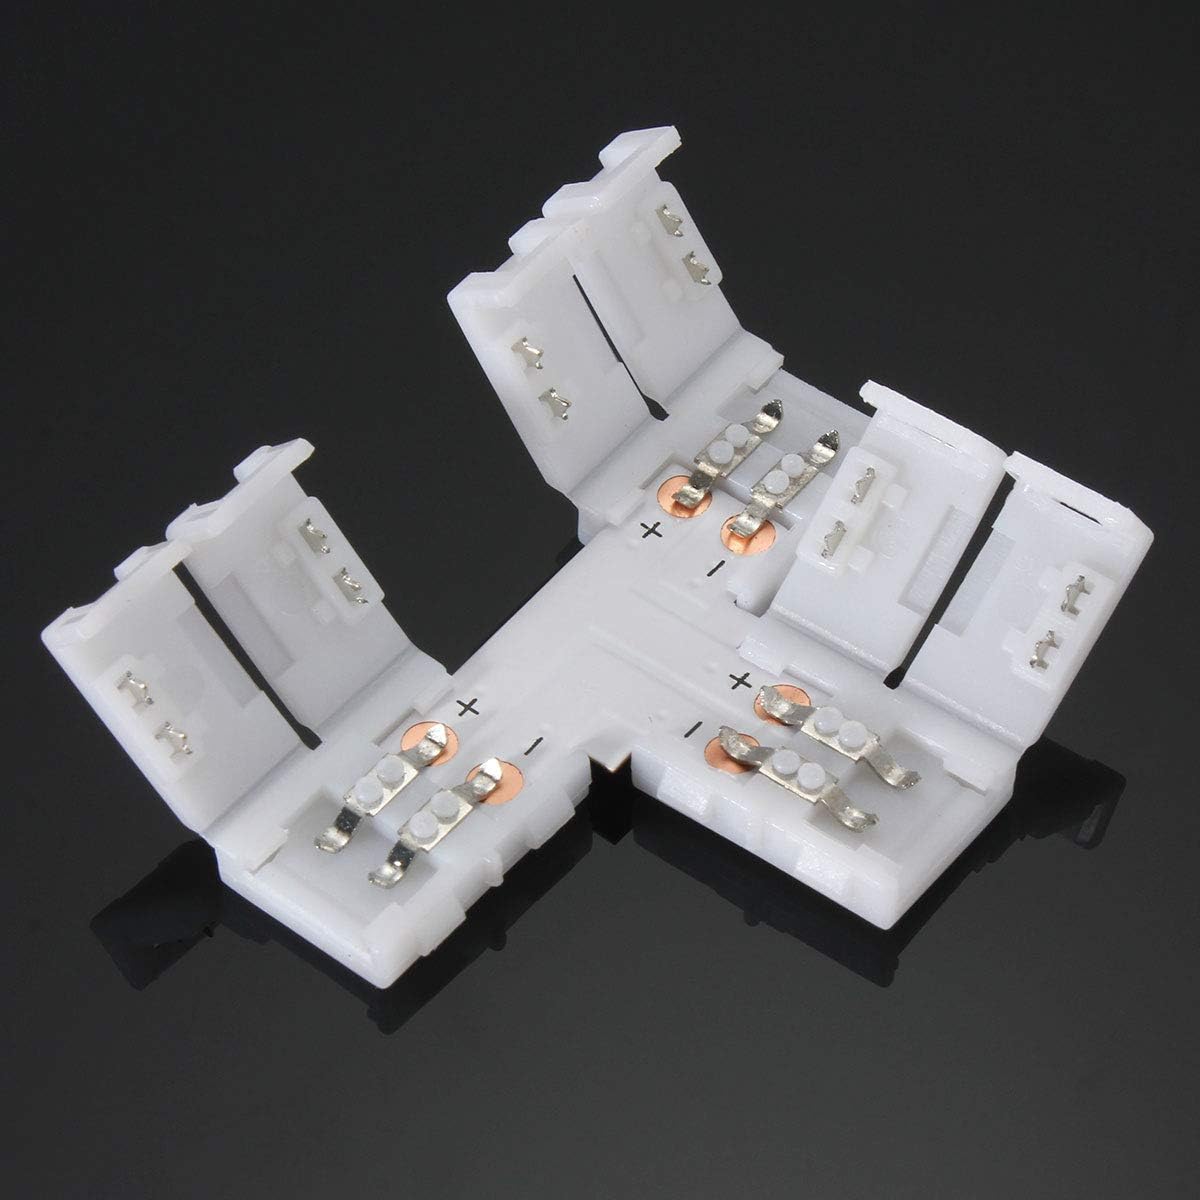 FSJEE 2Pin 8mm LED Strip Connector Kit Include L Shape 2 Pin Right Angle Corner Connector, T Shape Connector, Solderless Gapless Connector, Strip to Strip Jumper Wires for 2Pin 8mm 3528/2835 LED Strip